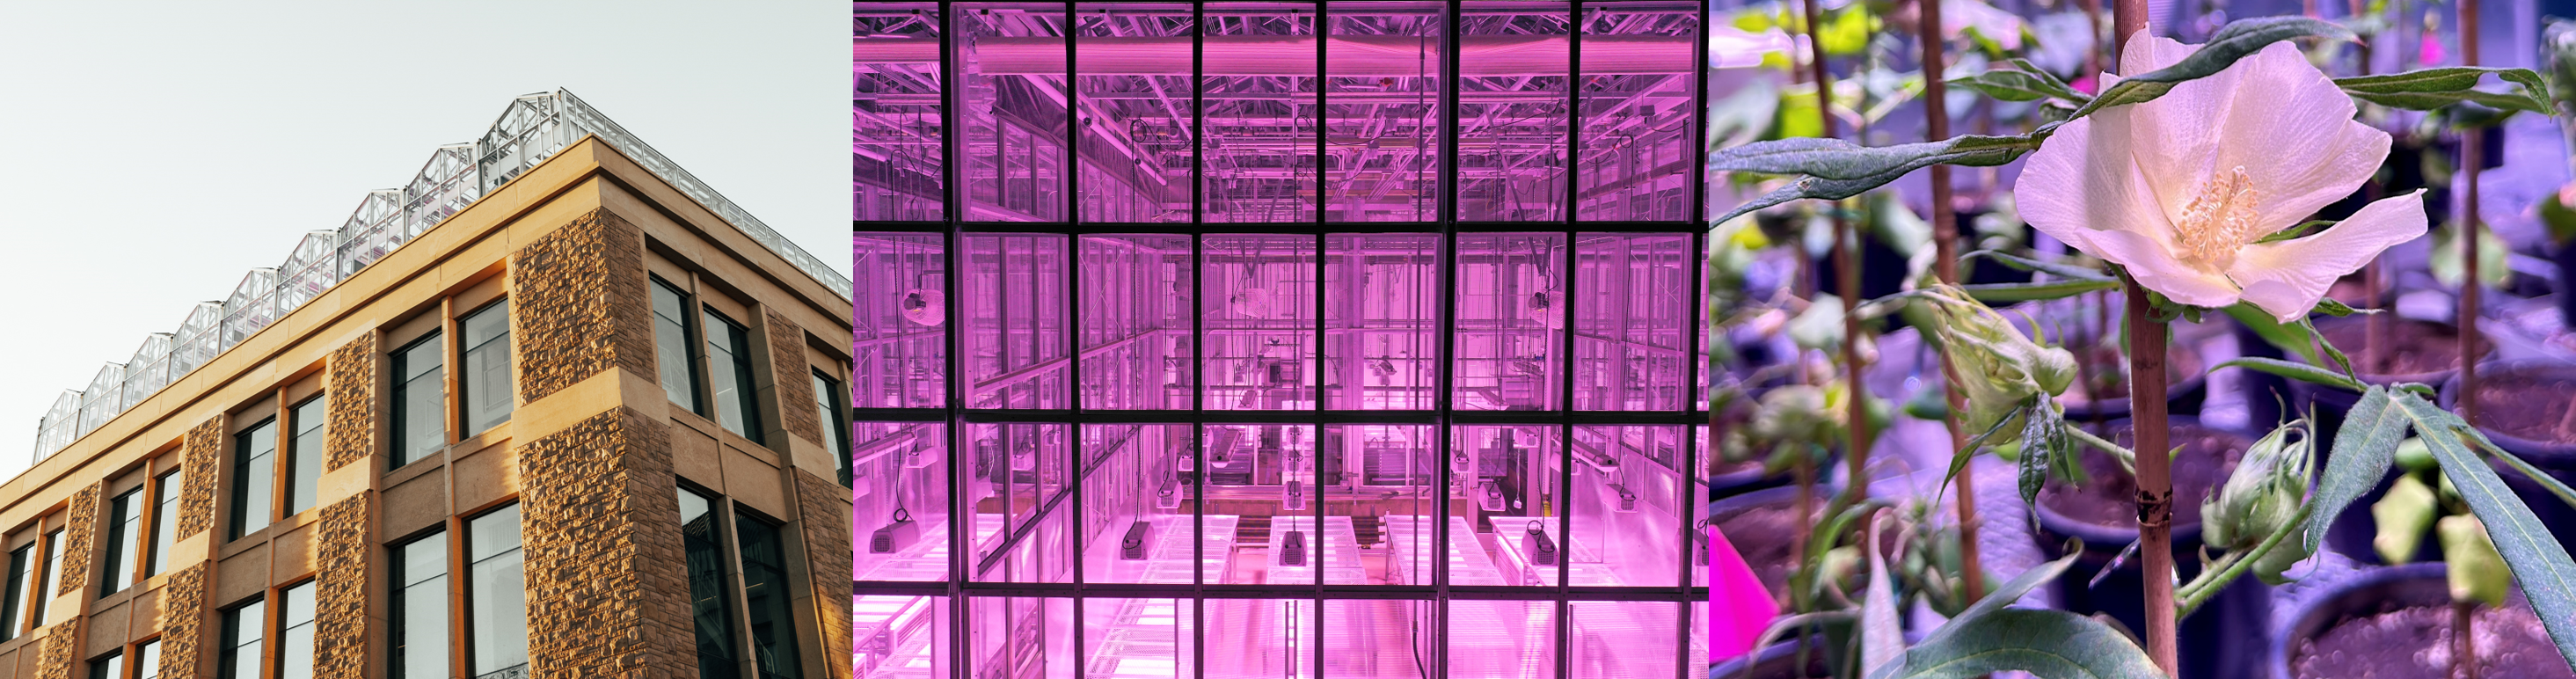 Greenhouse bays from outside; interior of greenhouse bays with pink light; plants on greenhouse bay bench with artificial light